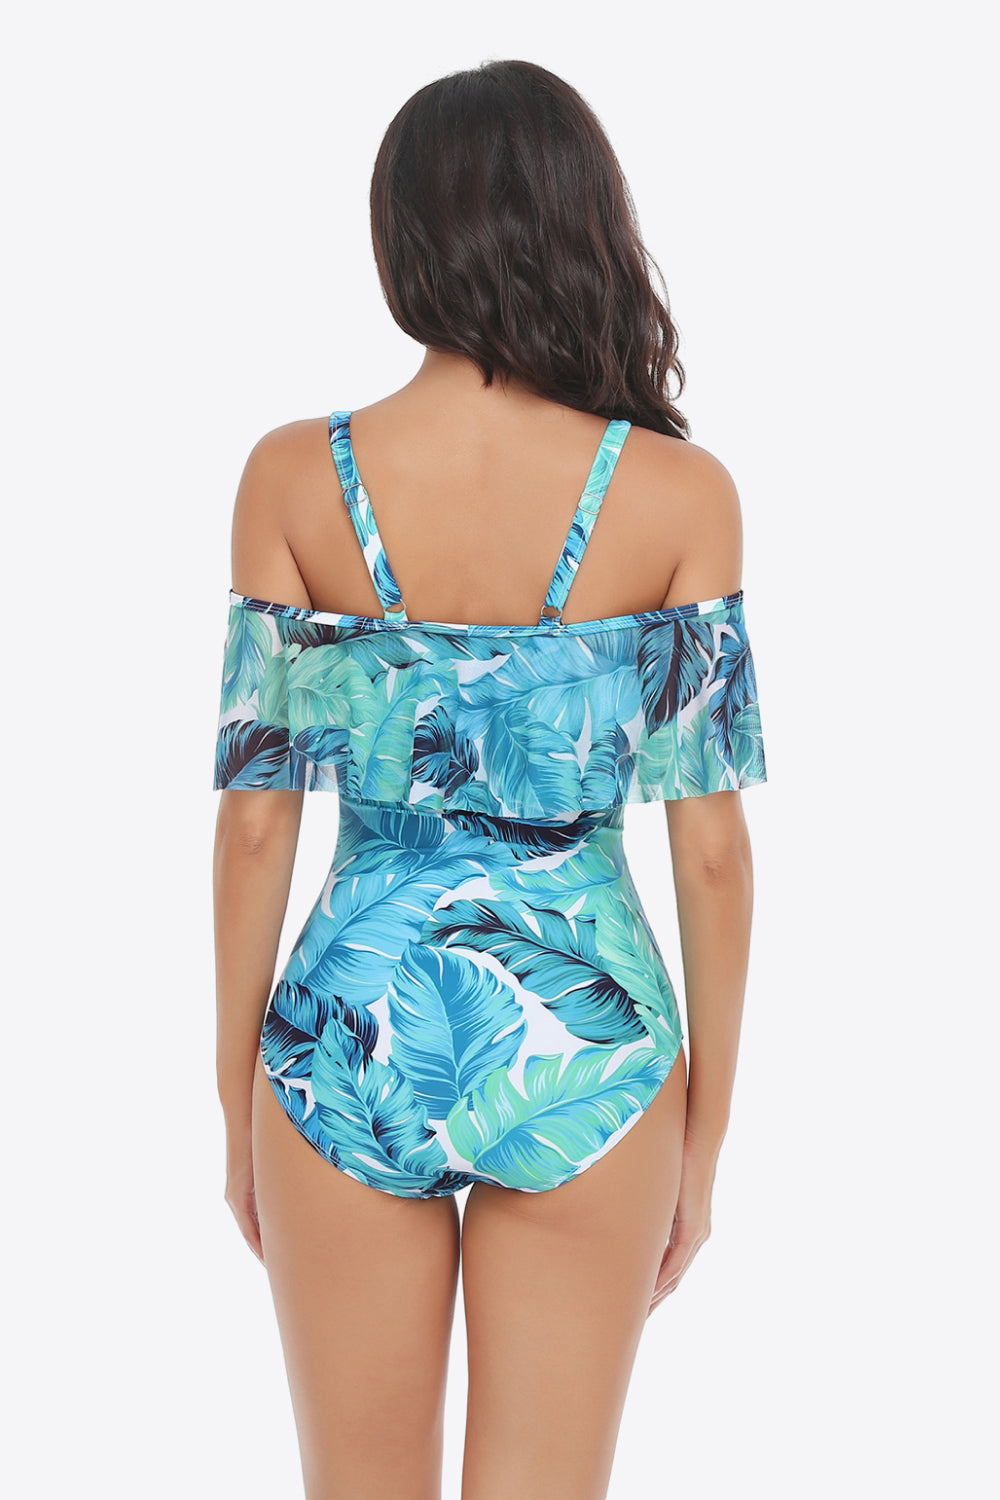 Botanical Print Cold-Shoulder Layered One-Piece Swimsuit - Women’s Clothing & Accessories - Swimwear - 6 - 2024